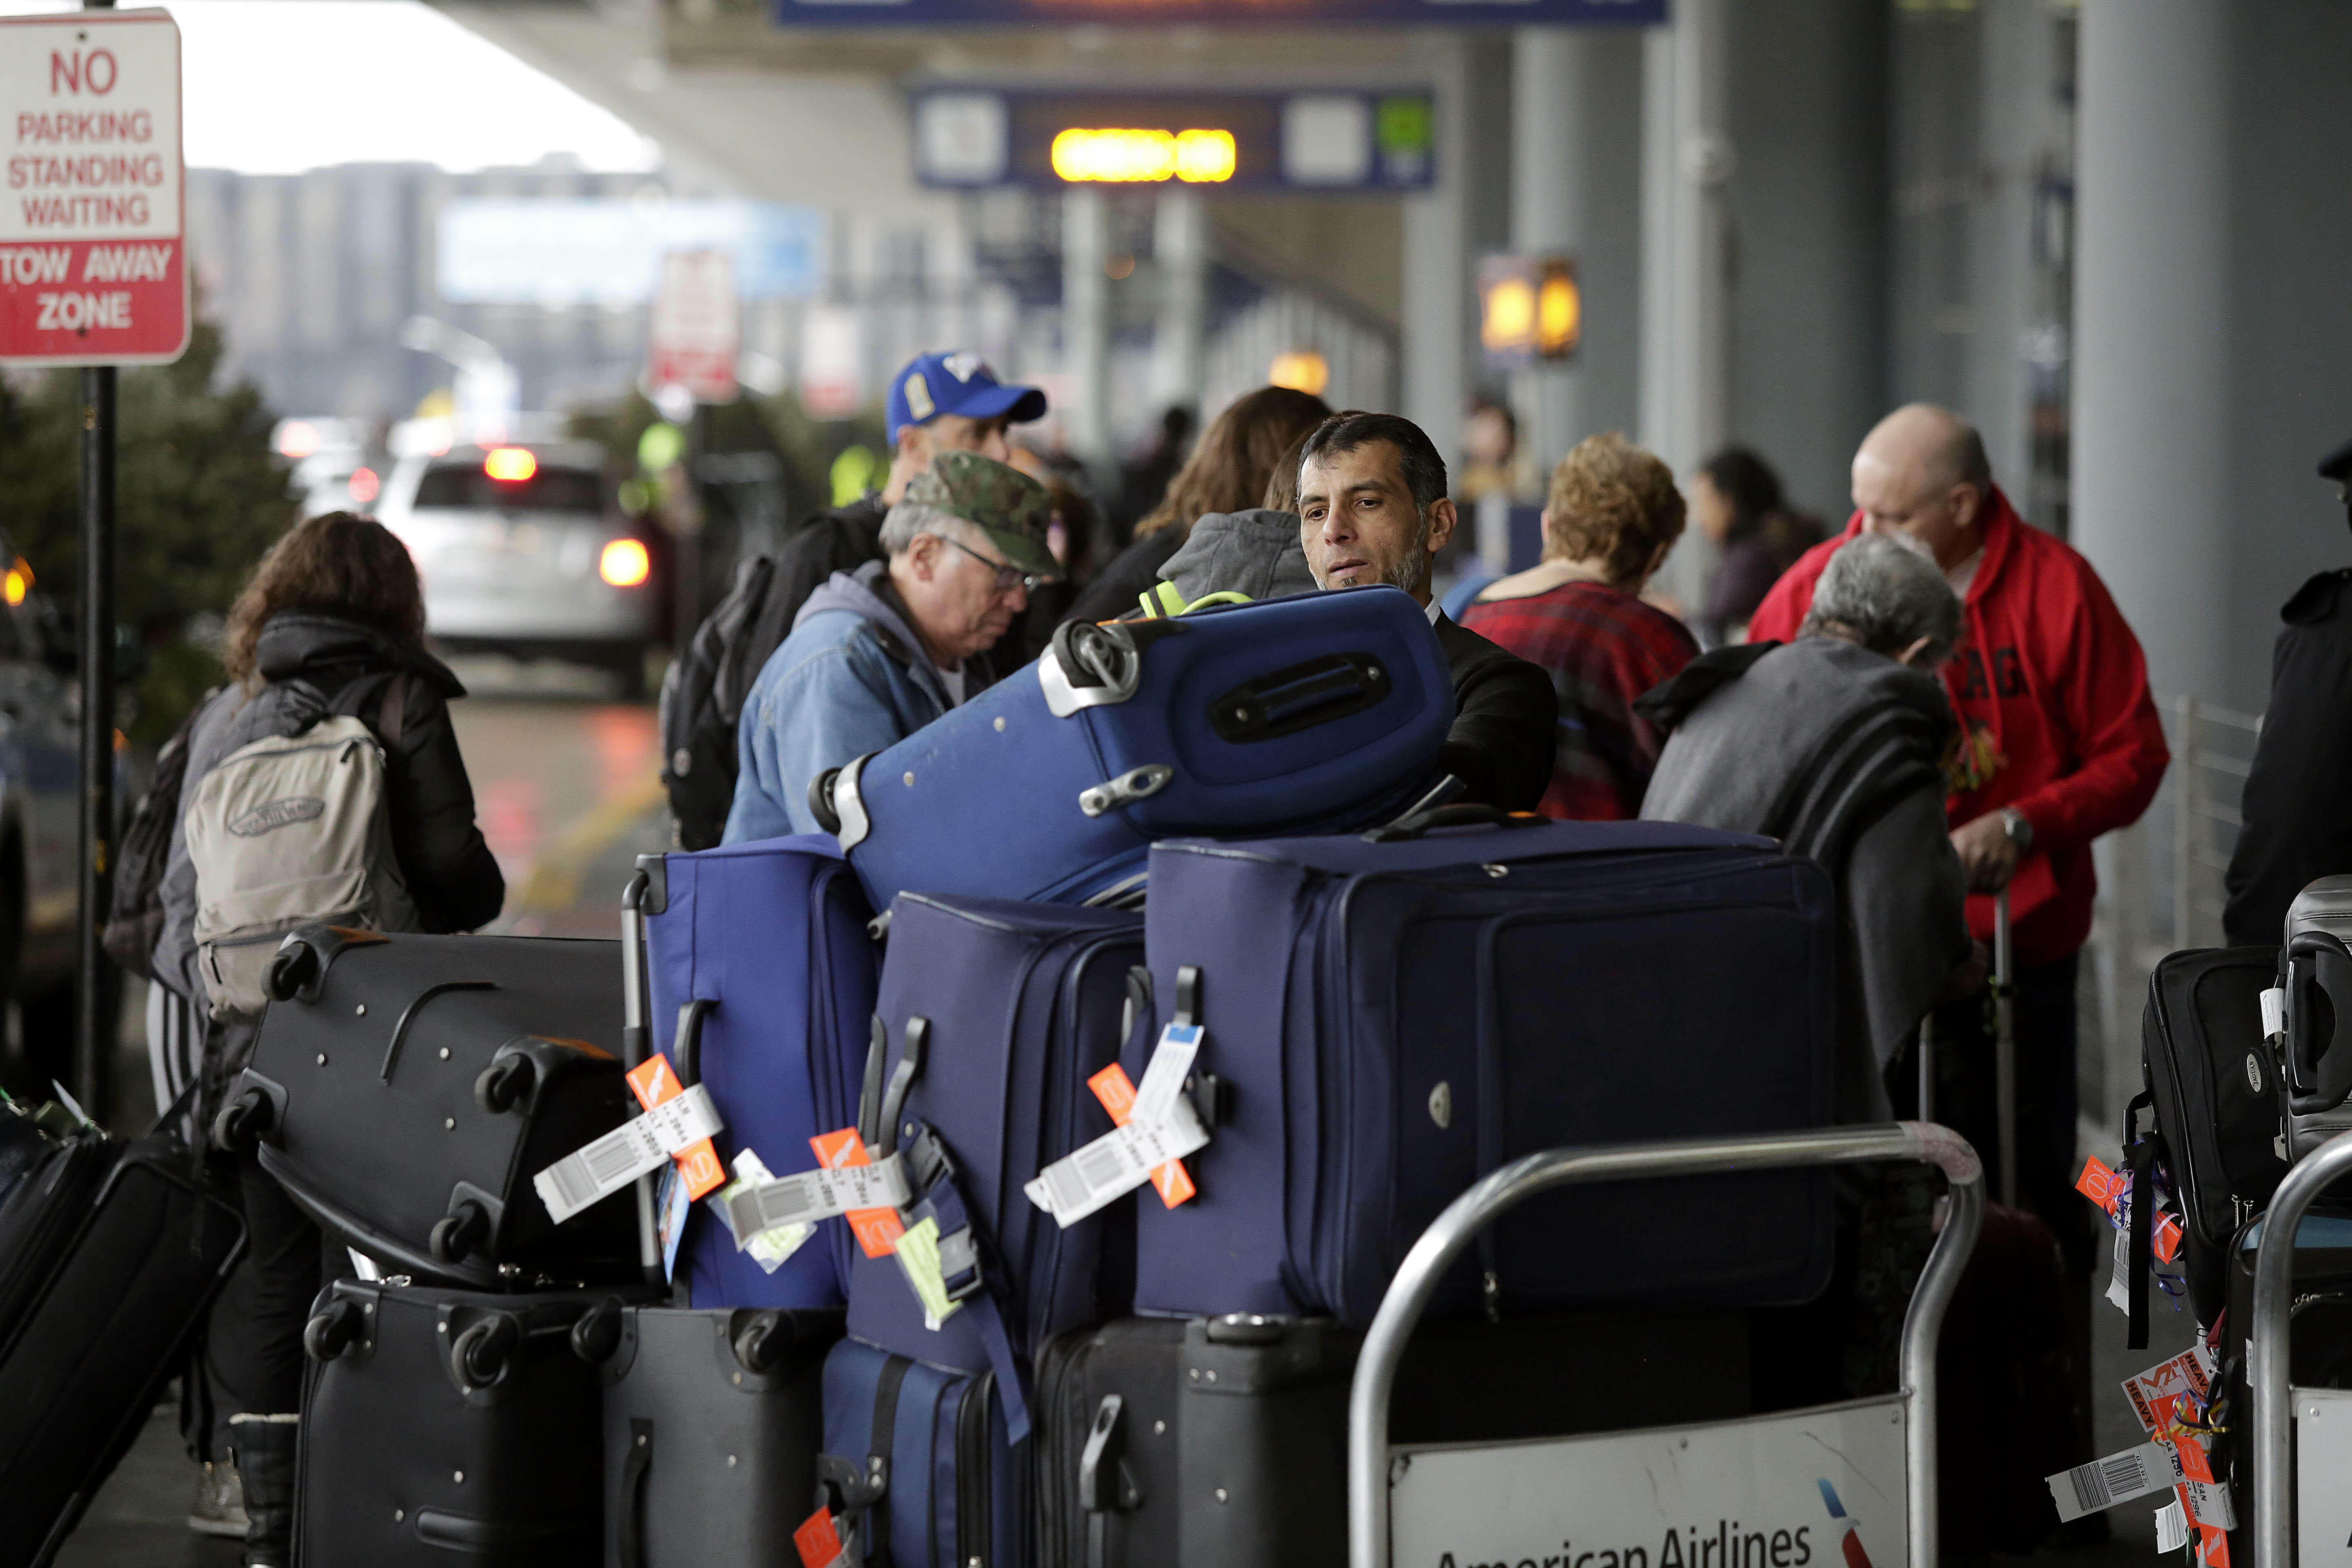 CHICAGO, IL - DECEMBER 23 : An airport worker organizes luggage on a cart as travelers in the back ground and in the pre check-in line at O'Hare International Airport on December 23, 2016 in Chicago, Illinois. O'hare International Airport is one of the bu